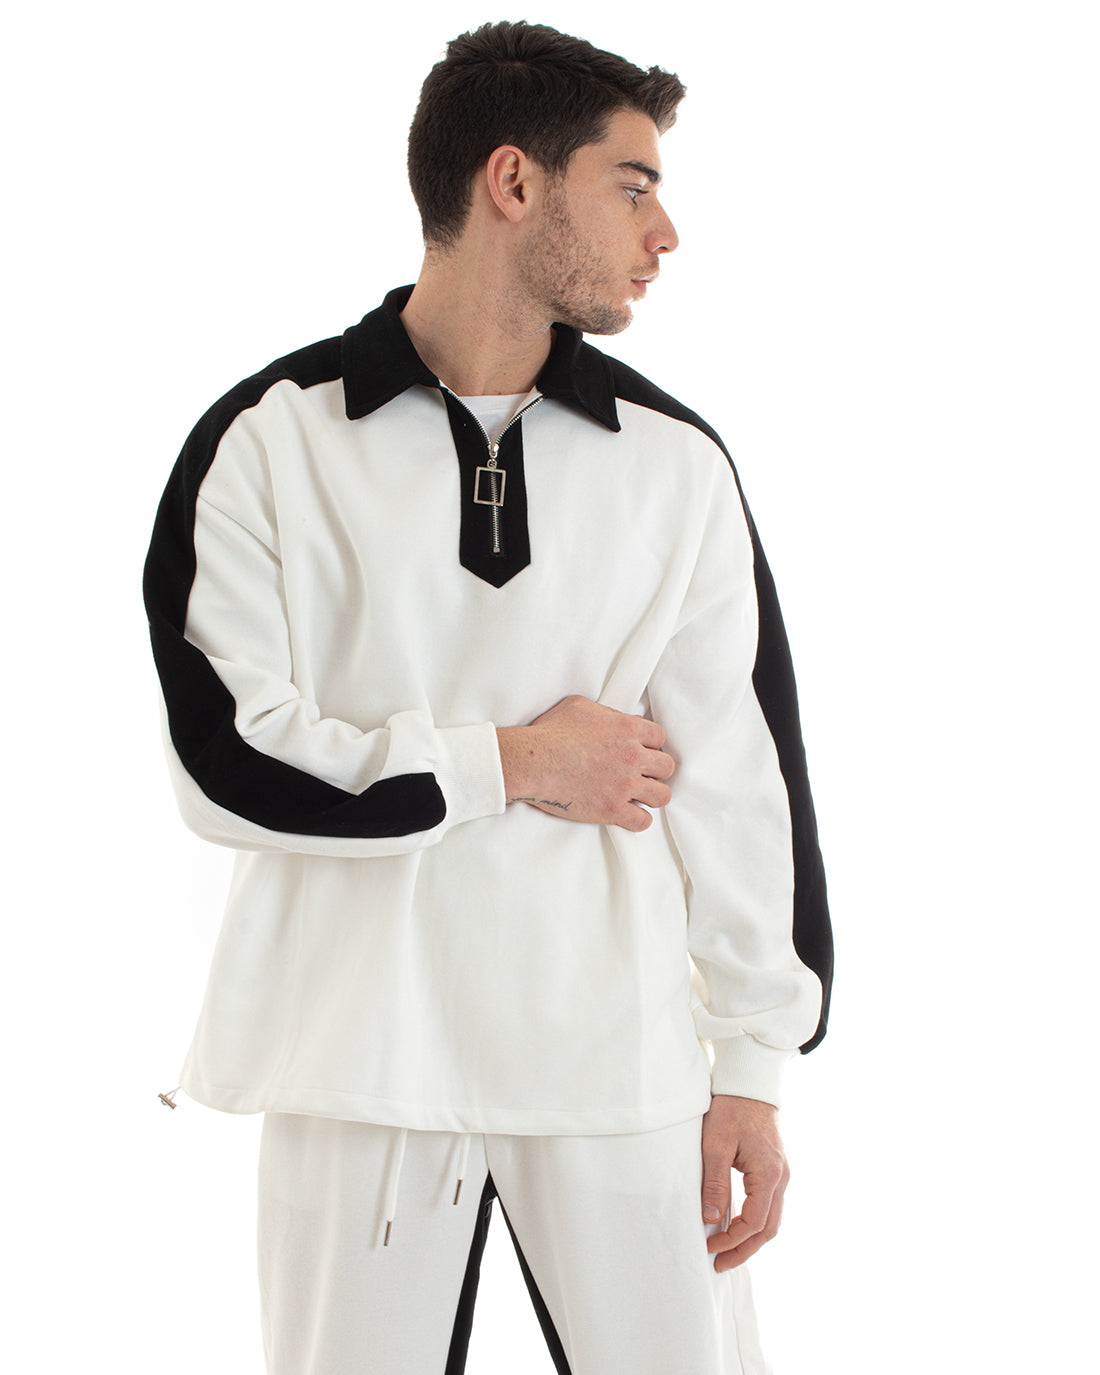 Complete Men's Tracksuit White Cotton Oversize Relaxed Fit Sweatshirt With Collar Trousers GIOSAL-OU2234A